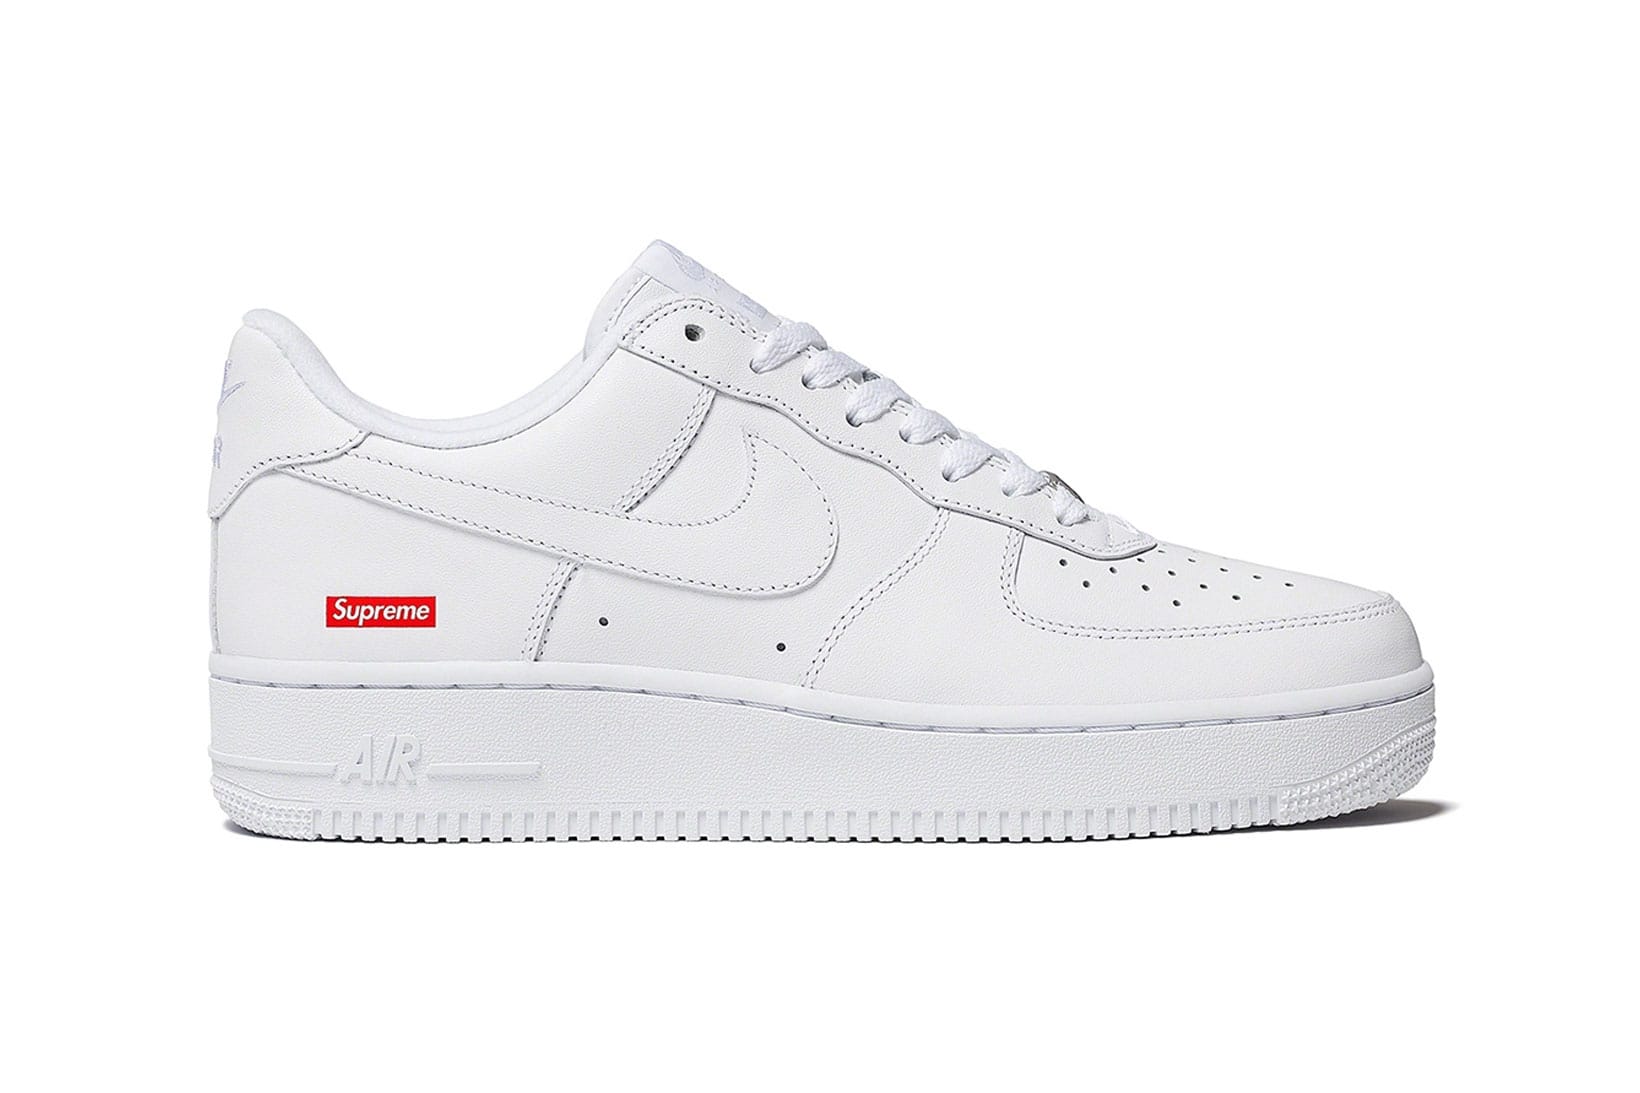 when are the supreme air forces restocking